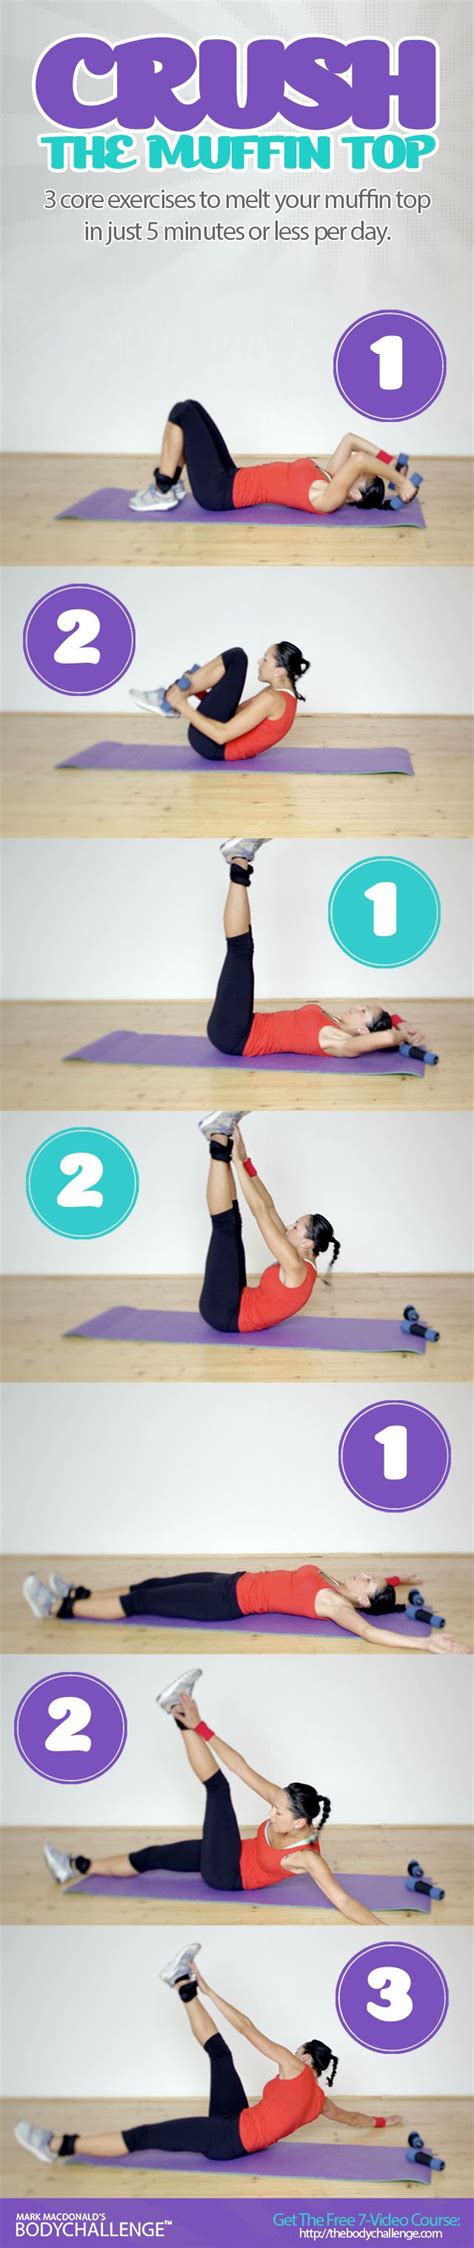 3 Moves You Can Use To Melt Your Muffin Top 5 Min Per Day Body